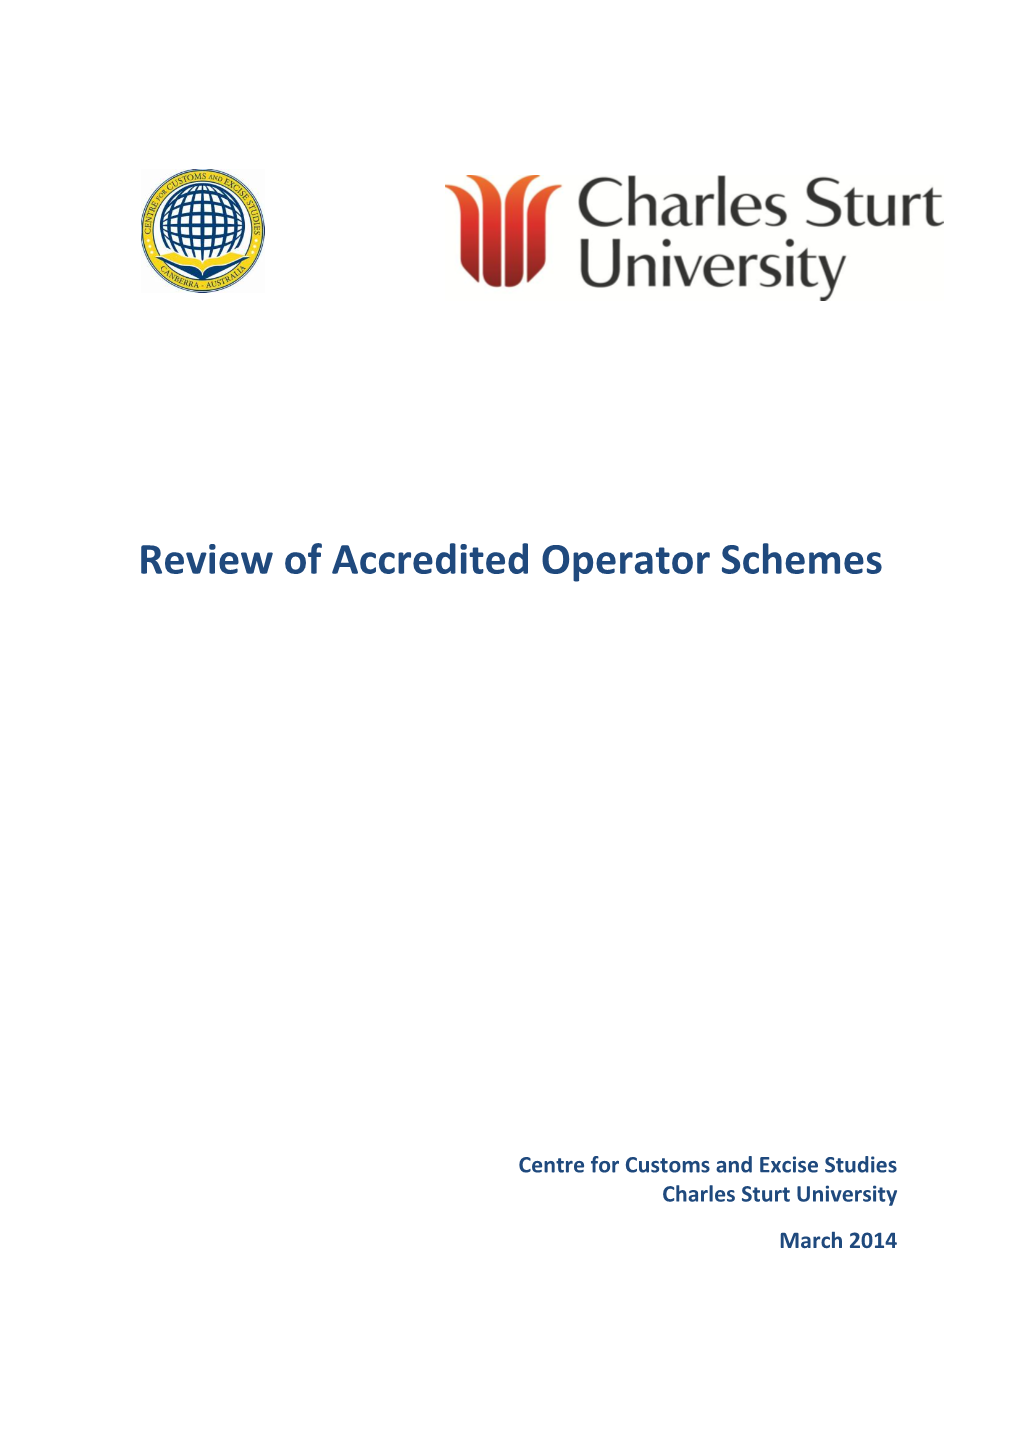 Review of Accredited Operator Schemes